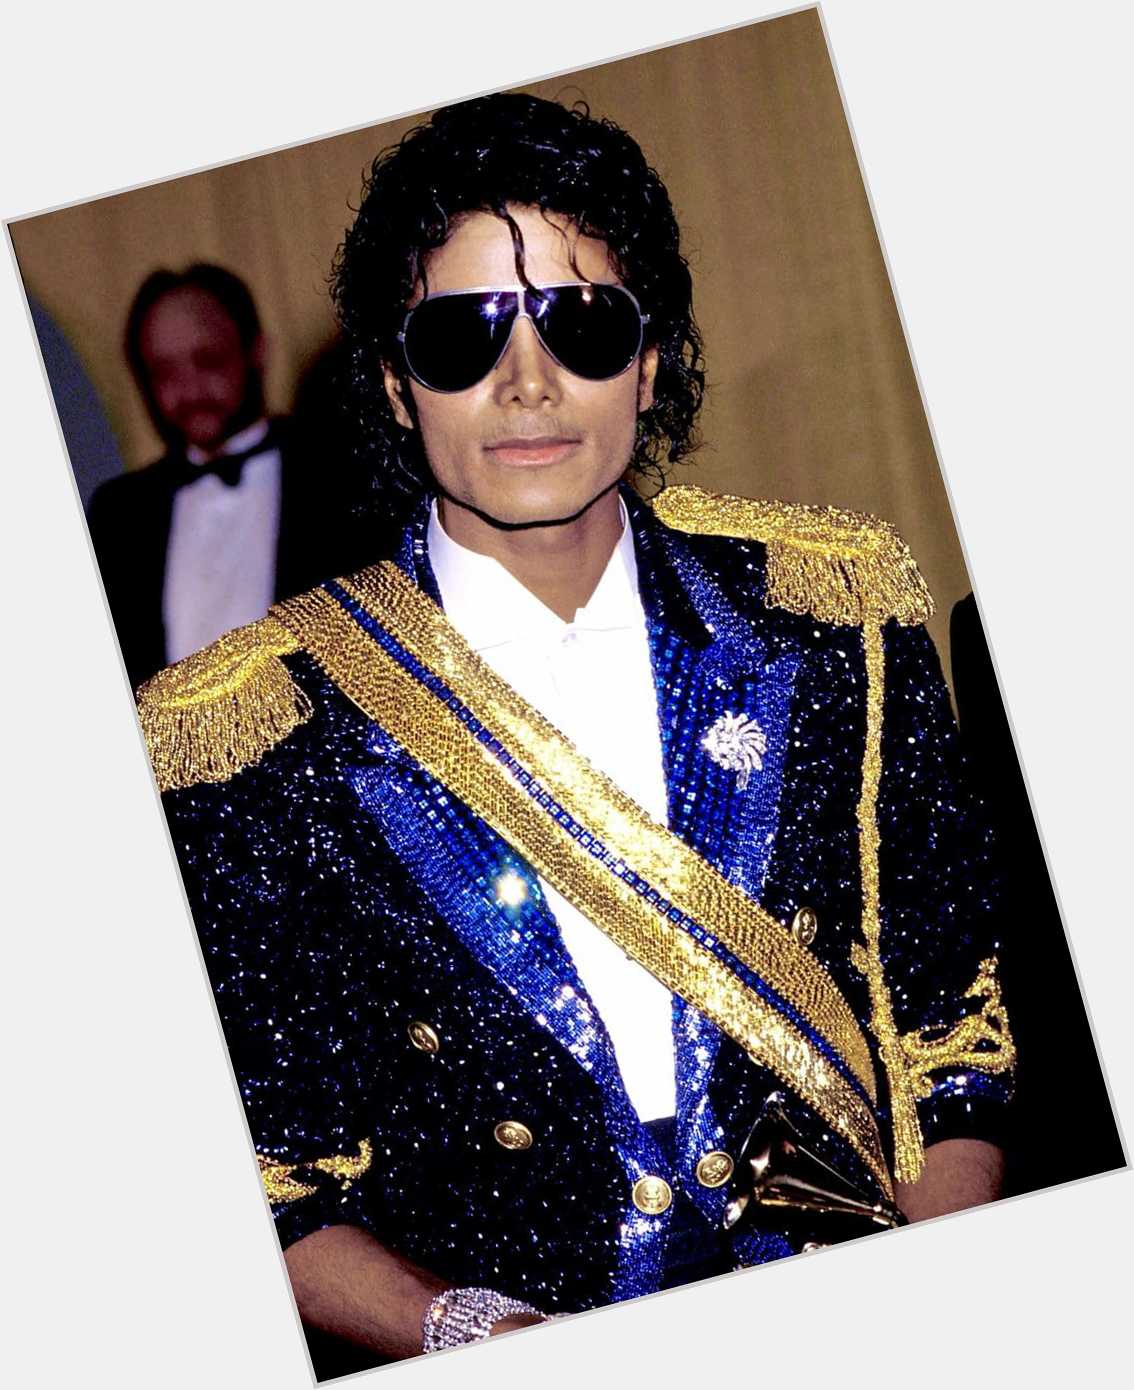 RIP to the King, Michael Jackson. We learned it all from you. 

Happy birthday. 